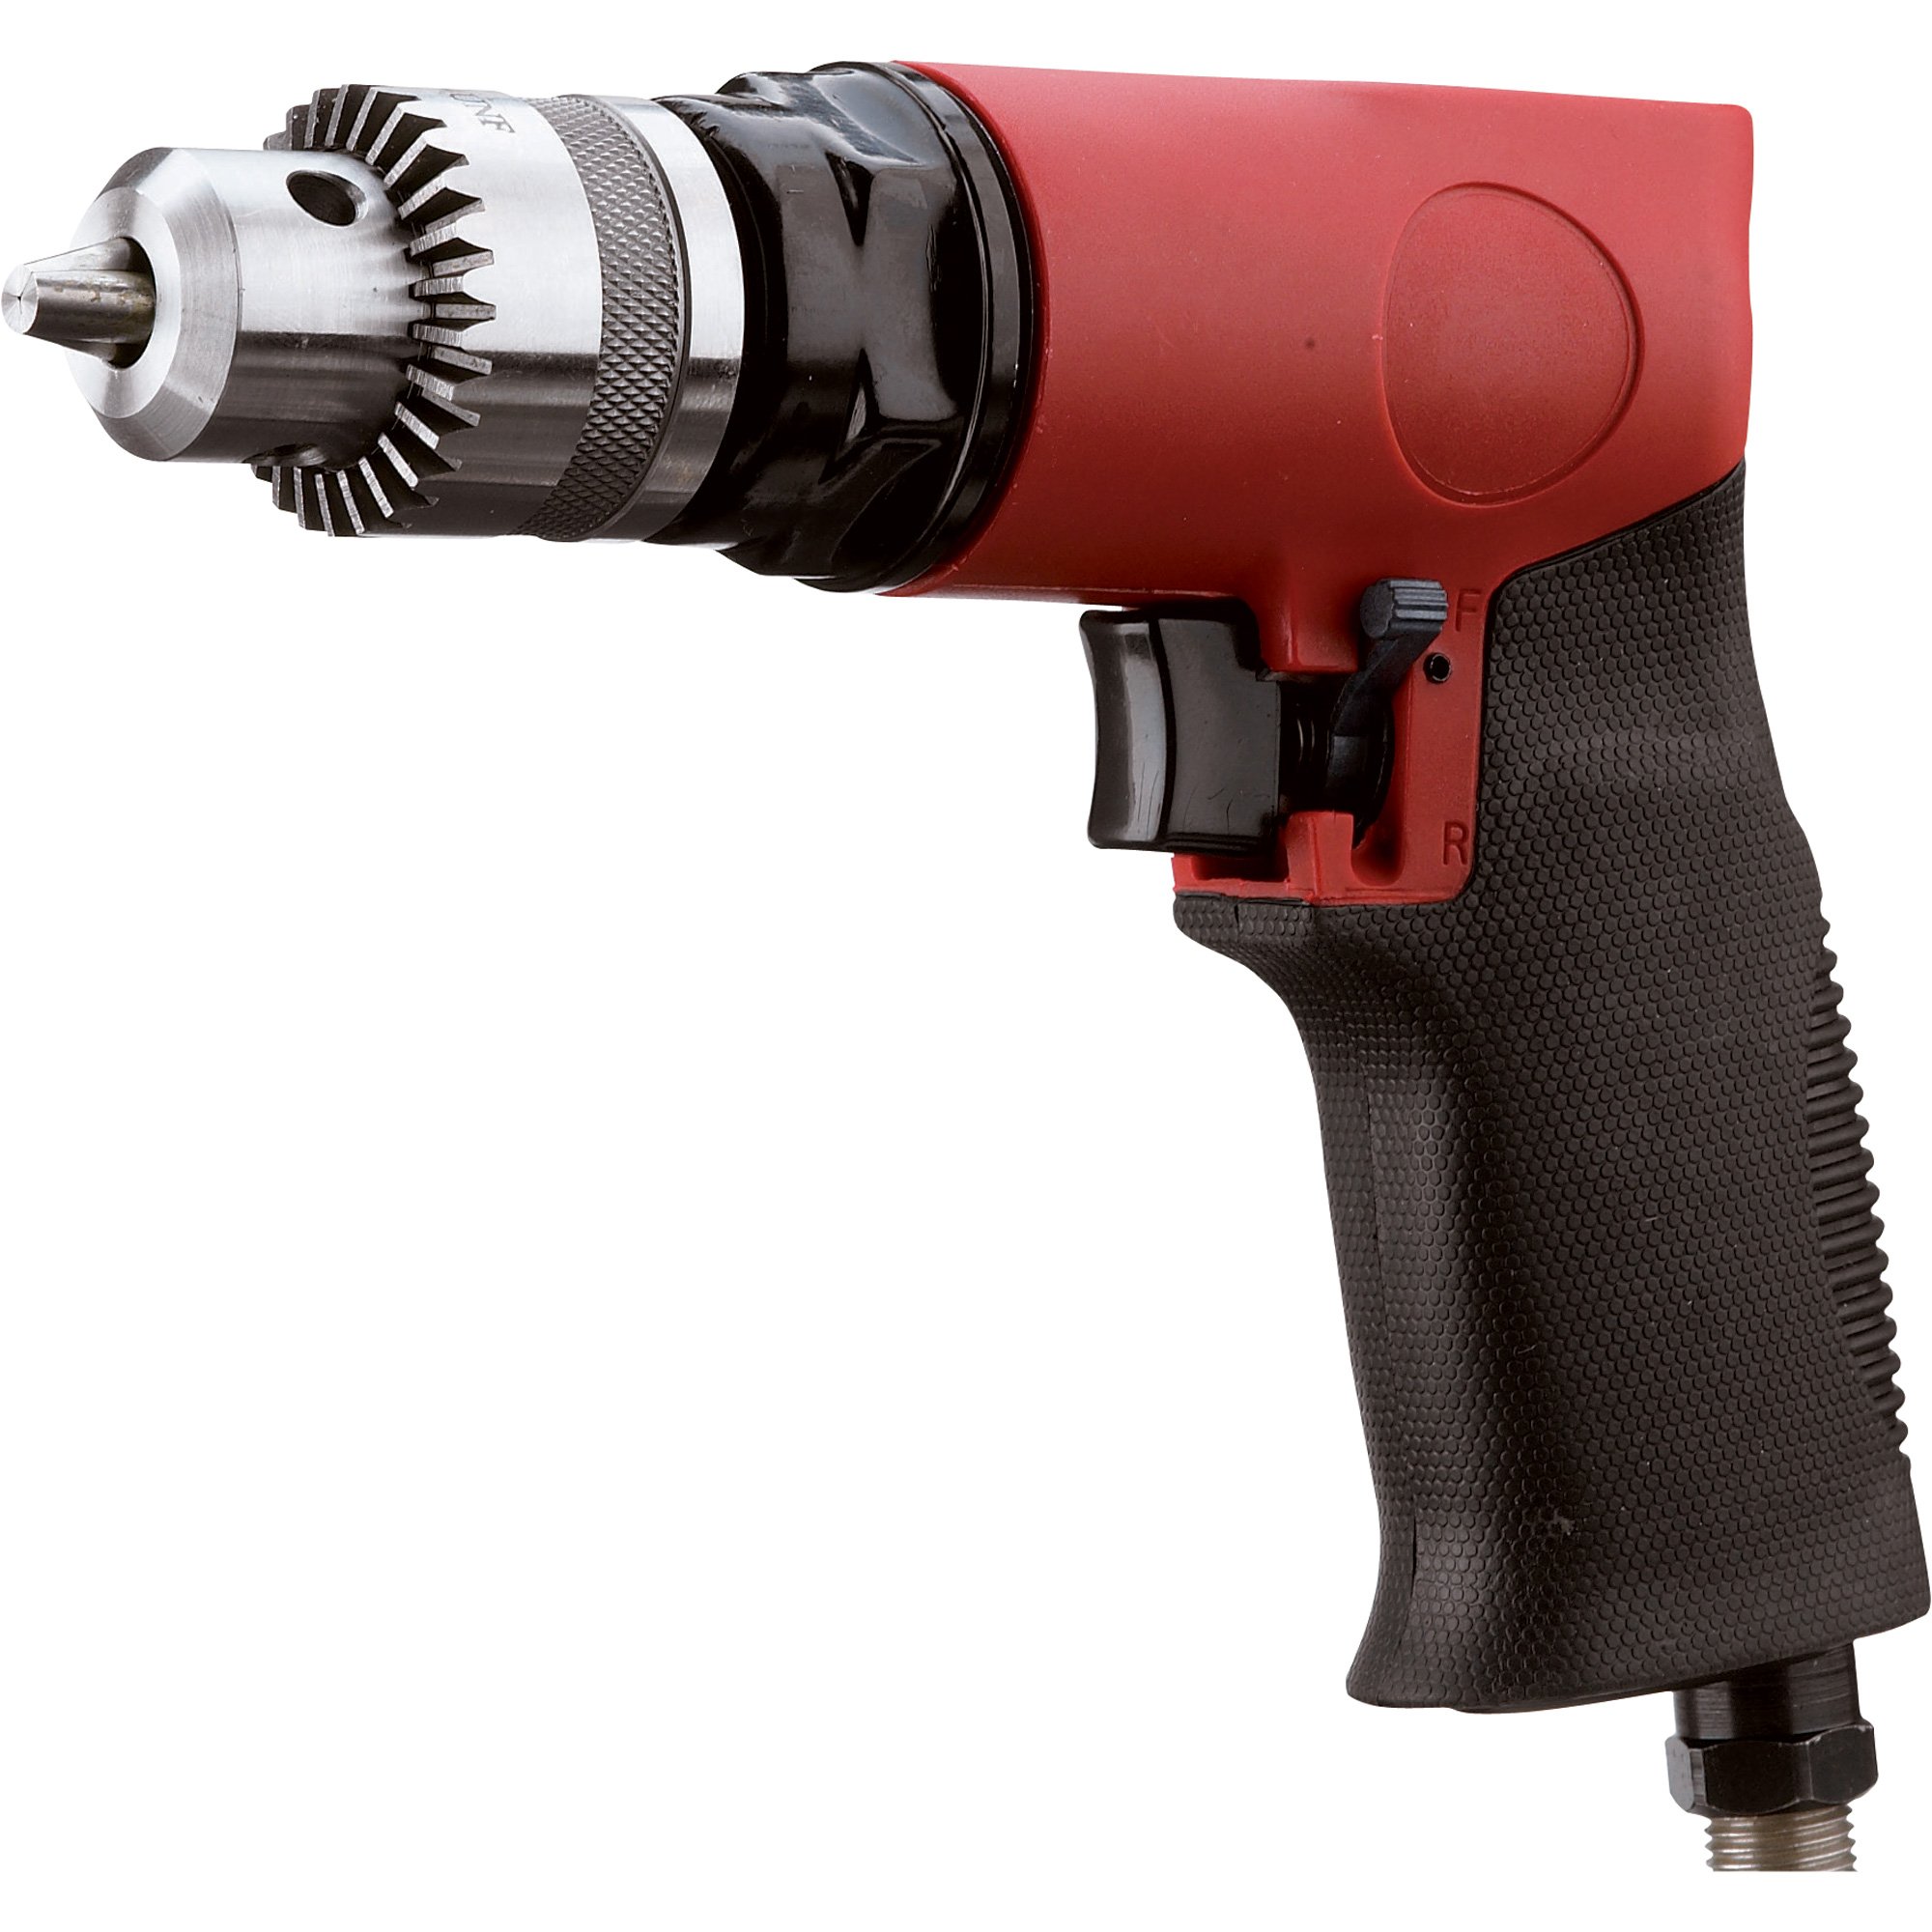 AFF 3/8 Reversible Air Drill w/ Keyed Chuck - 7200 [Clearance] - All Tire  Supply